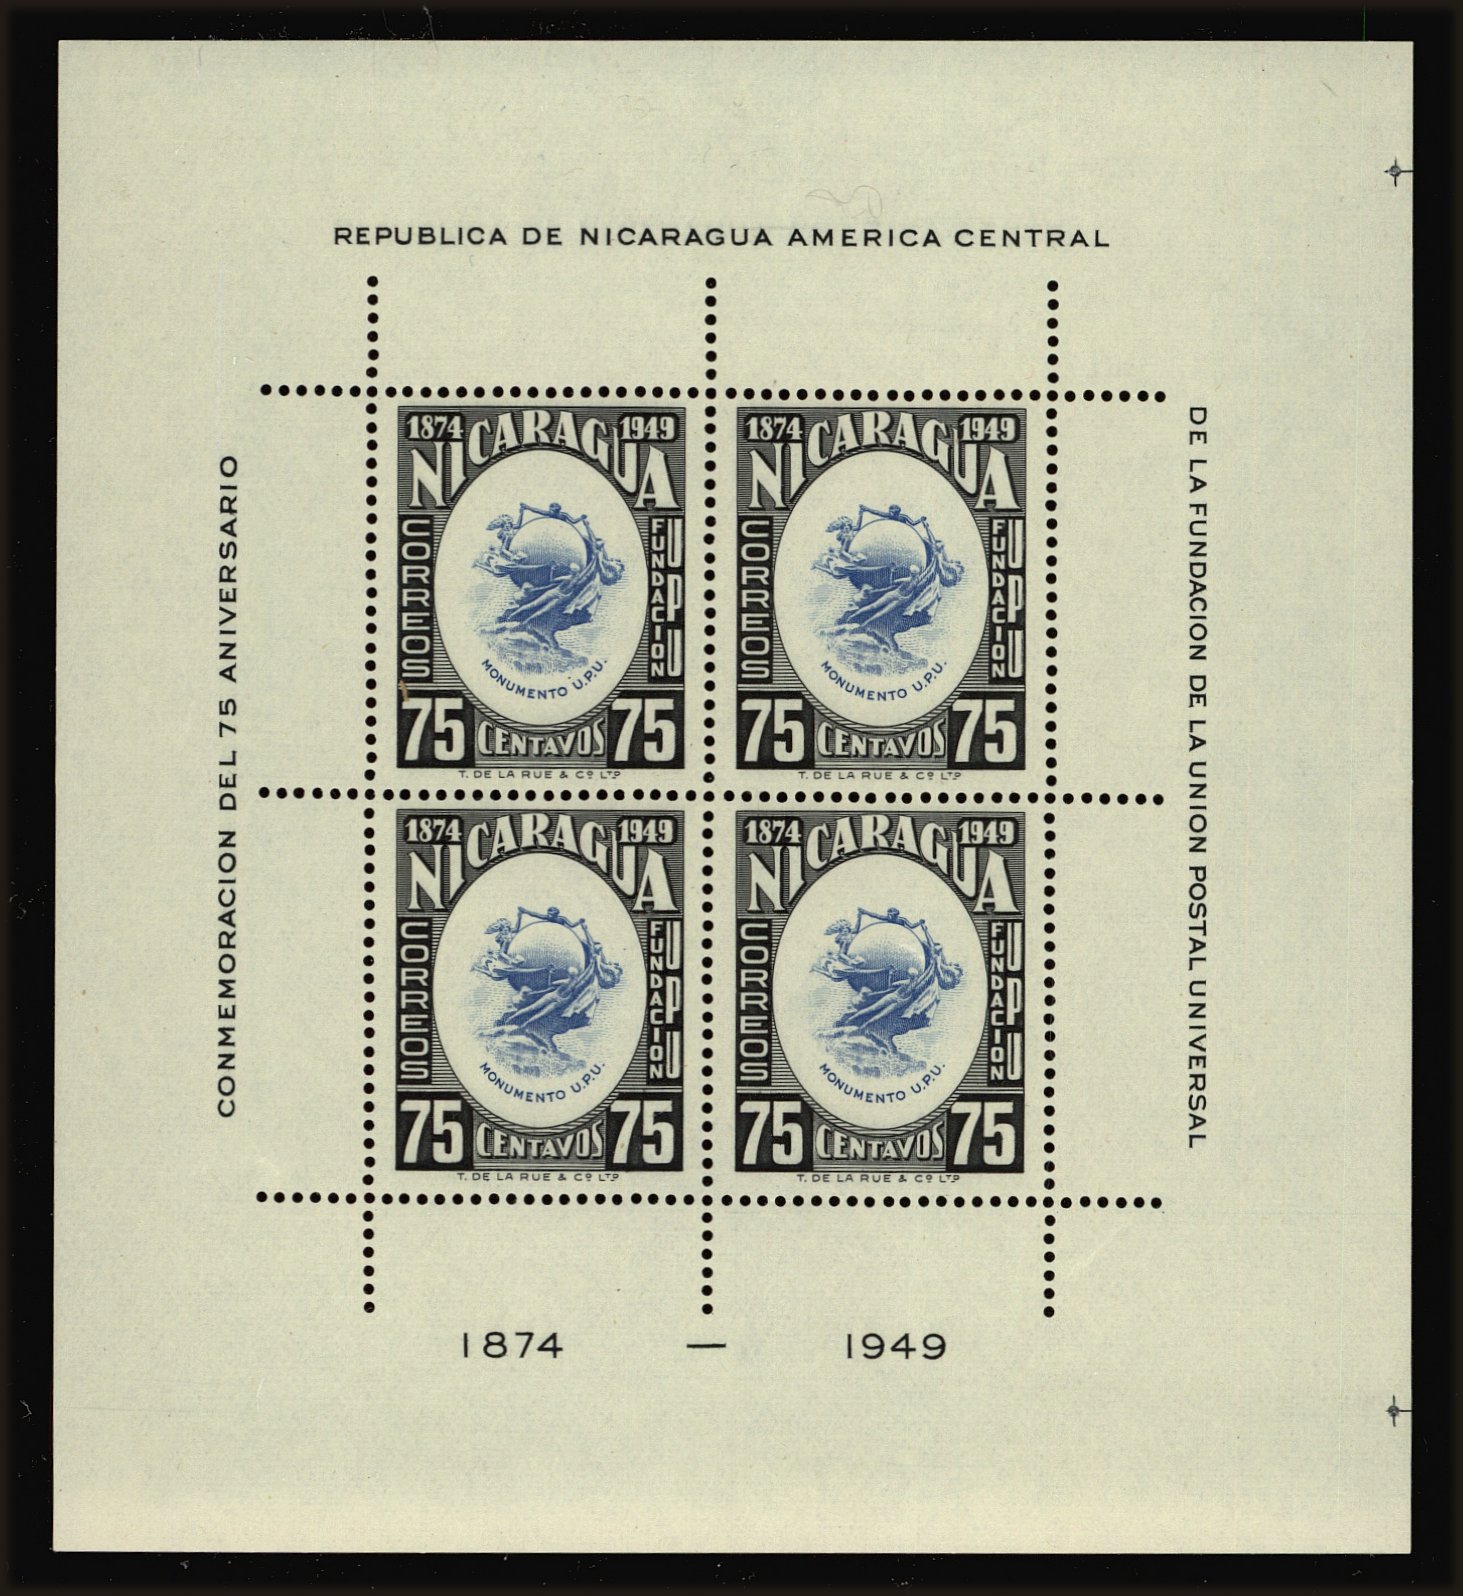 Front view of Nicaragua 732 collectors stamp